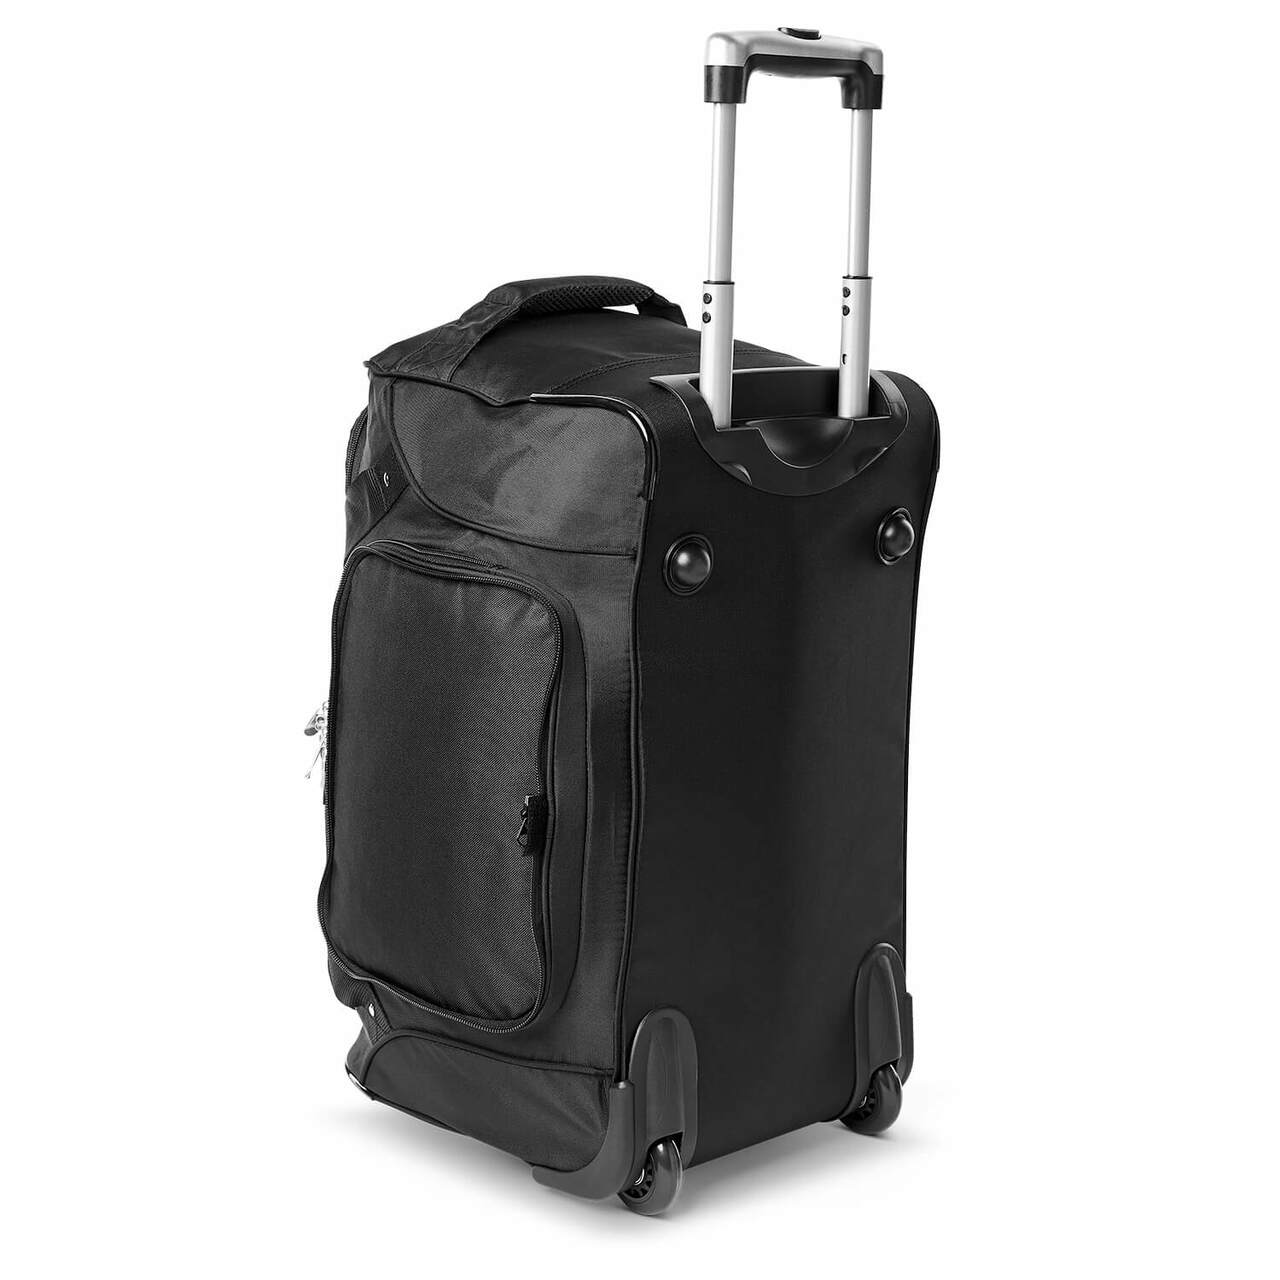 St Louis Blues Luggage | St Louis Blues Wheeled Carry On Luggage